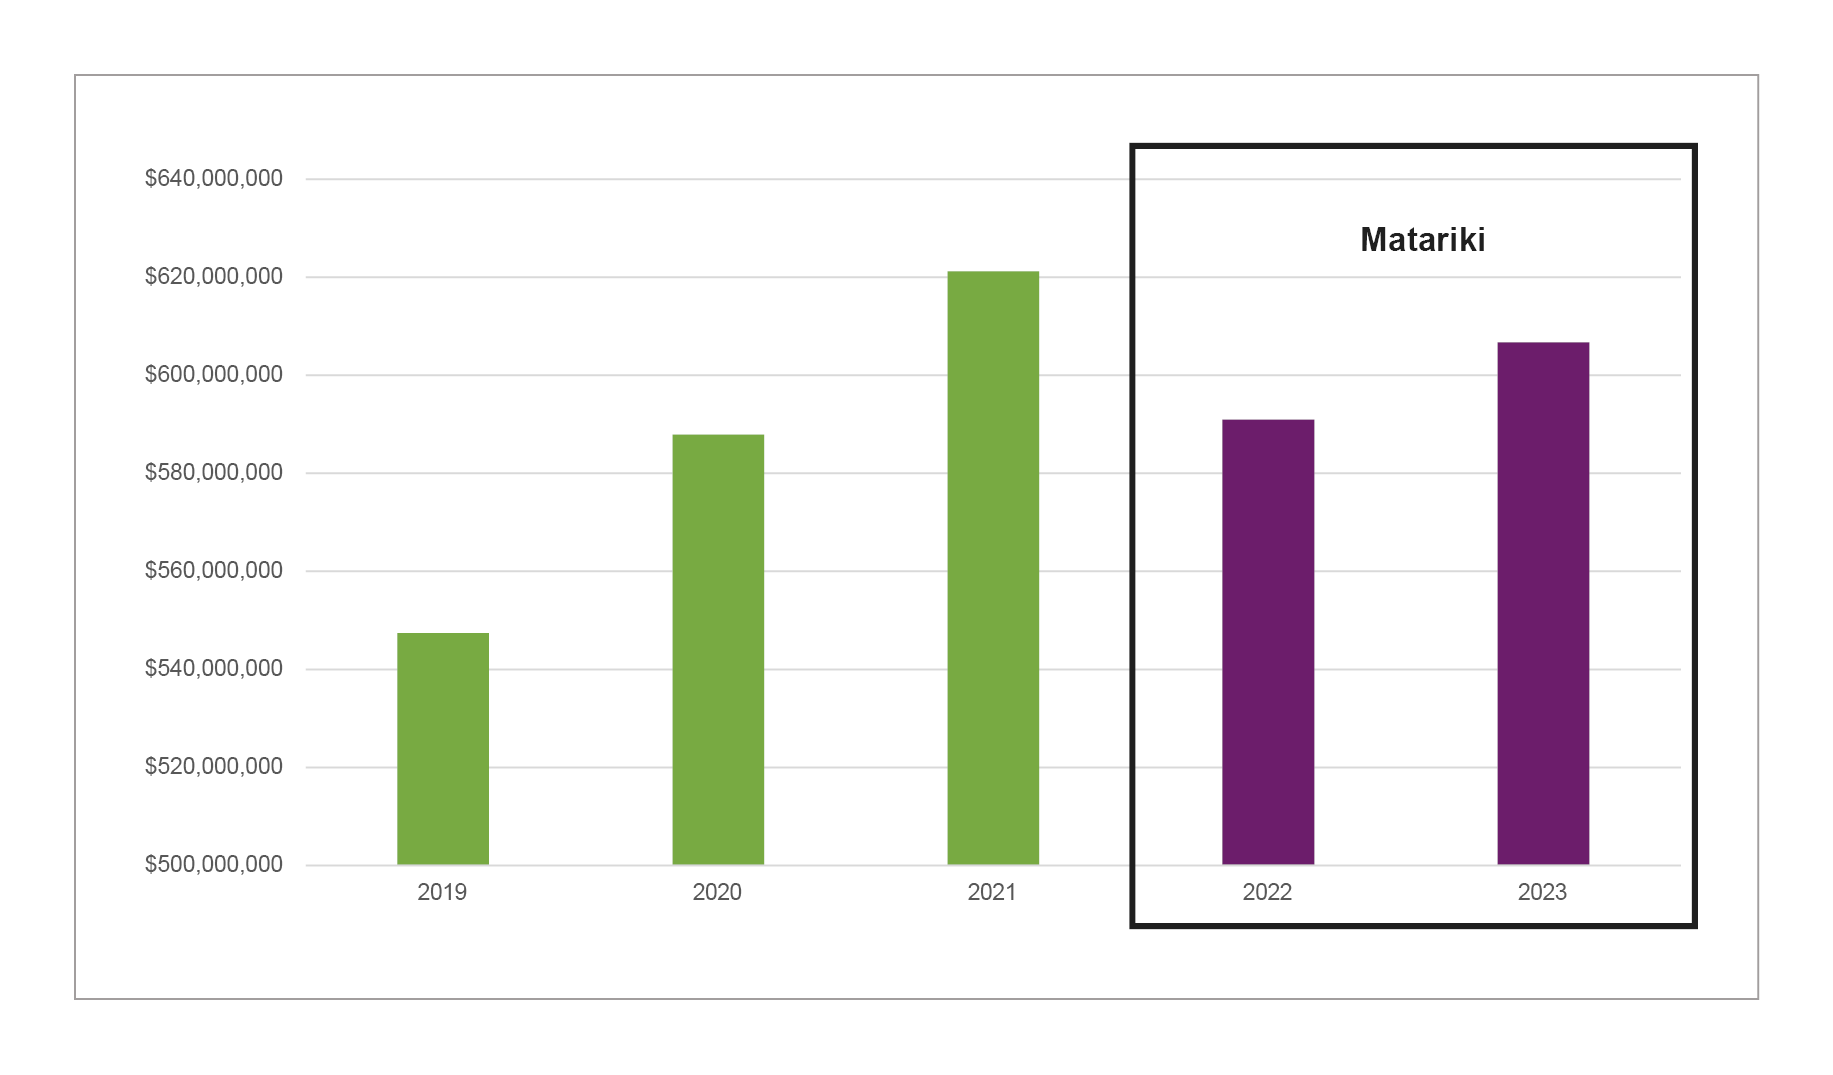 Bar graph showing the total consumer spend over Matariki, there is a box around the  Matariki bars.